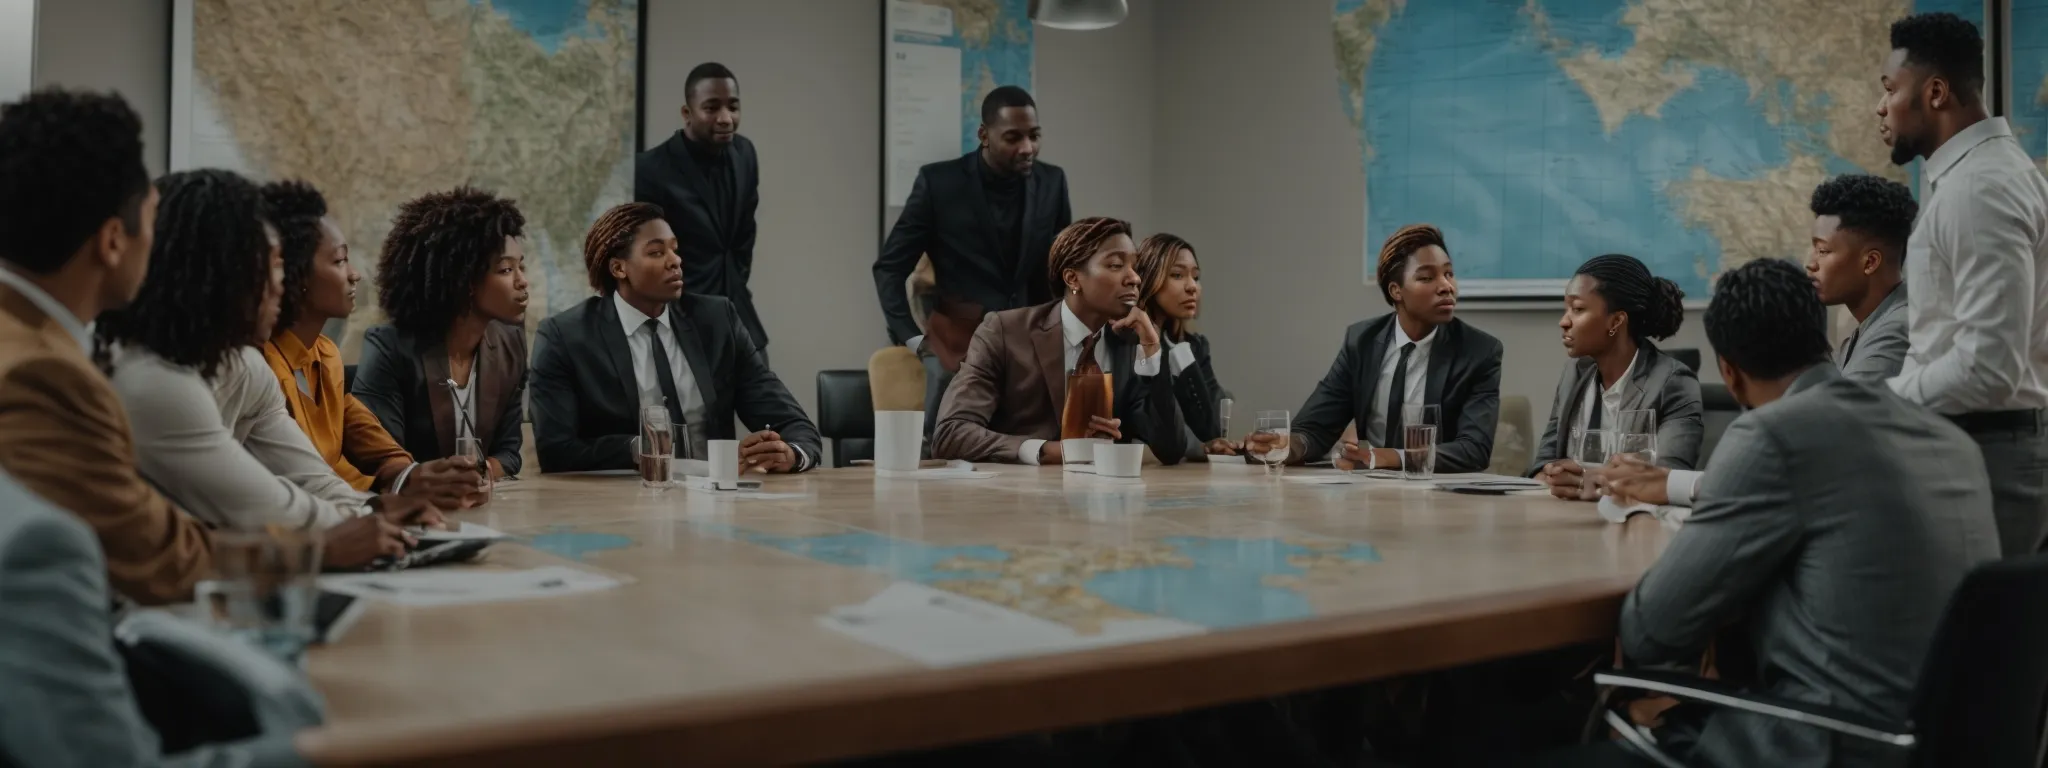 a diverse group of people gathered around a conference table with a world map, intently discussing marketing strategies.